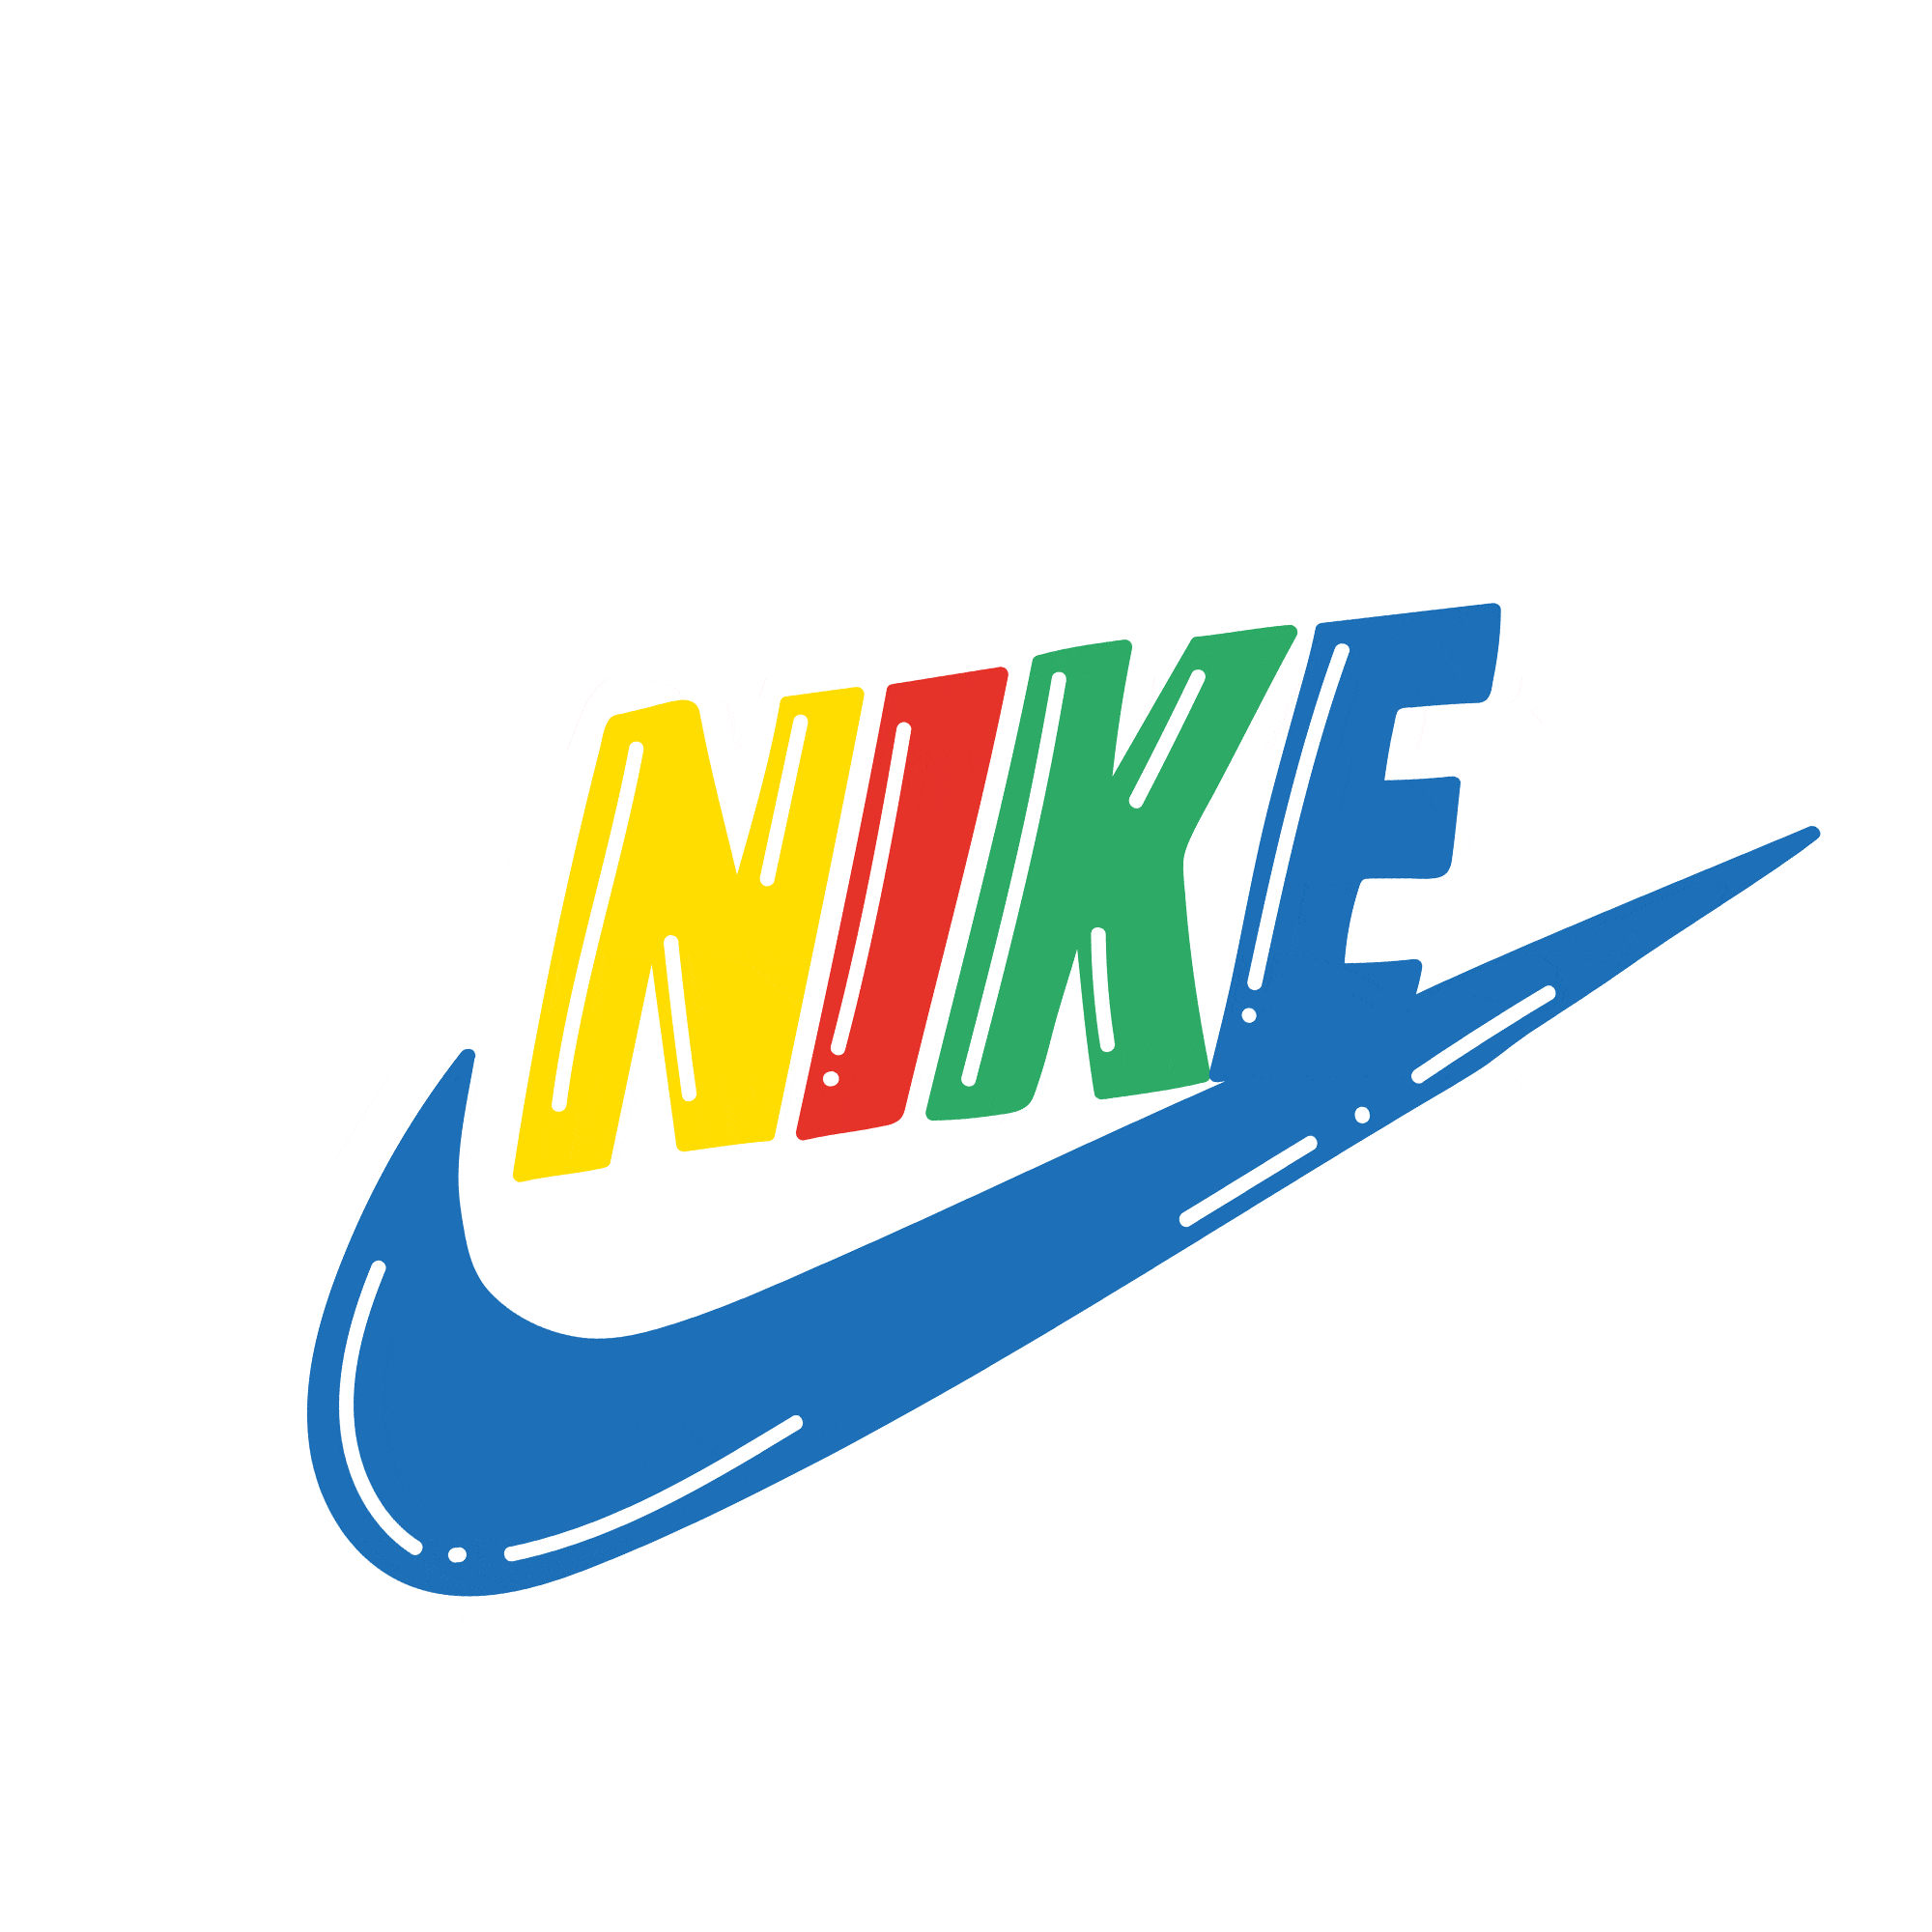 Asos Nike Sticker by ASOS for iOS & Android | GIPHY